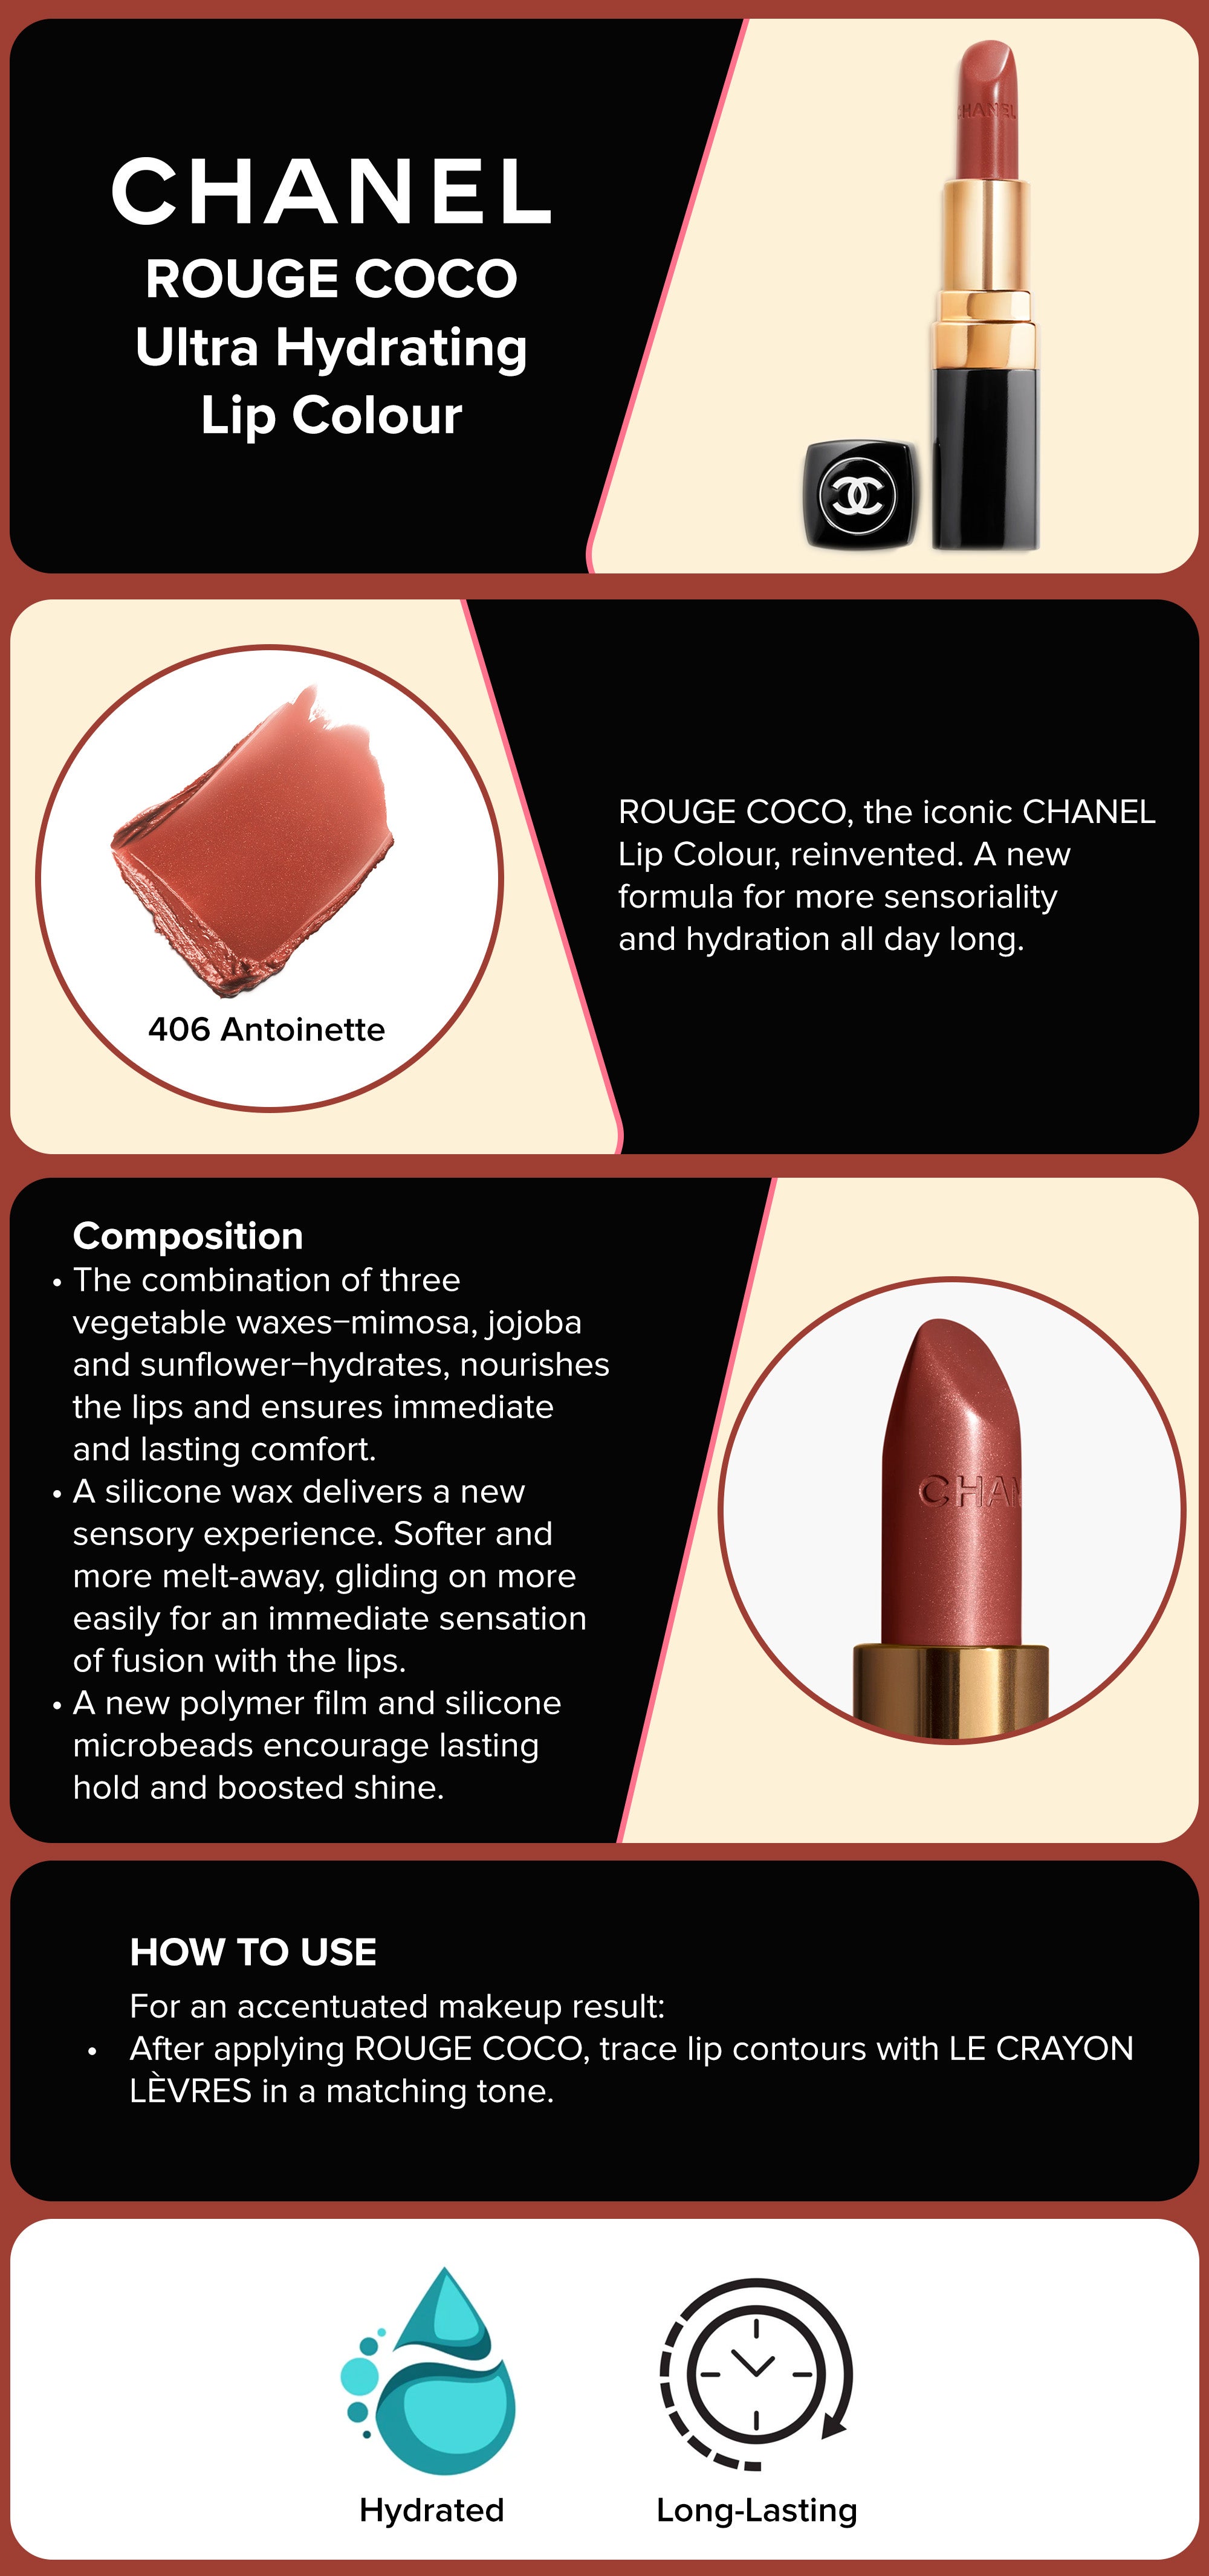 chanel rouge coco 406 antoinette